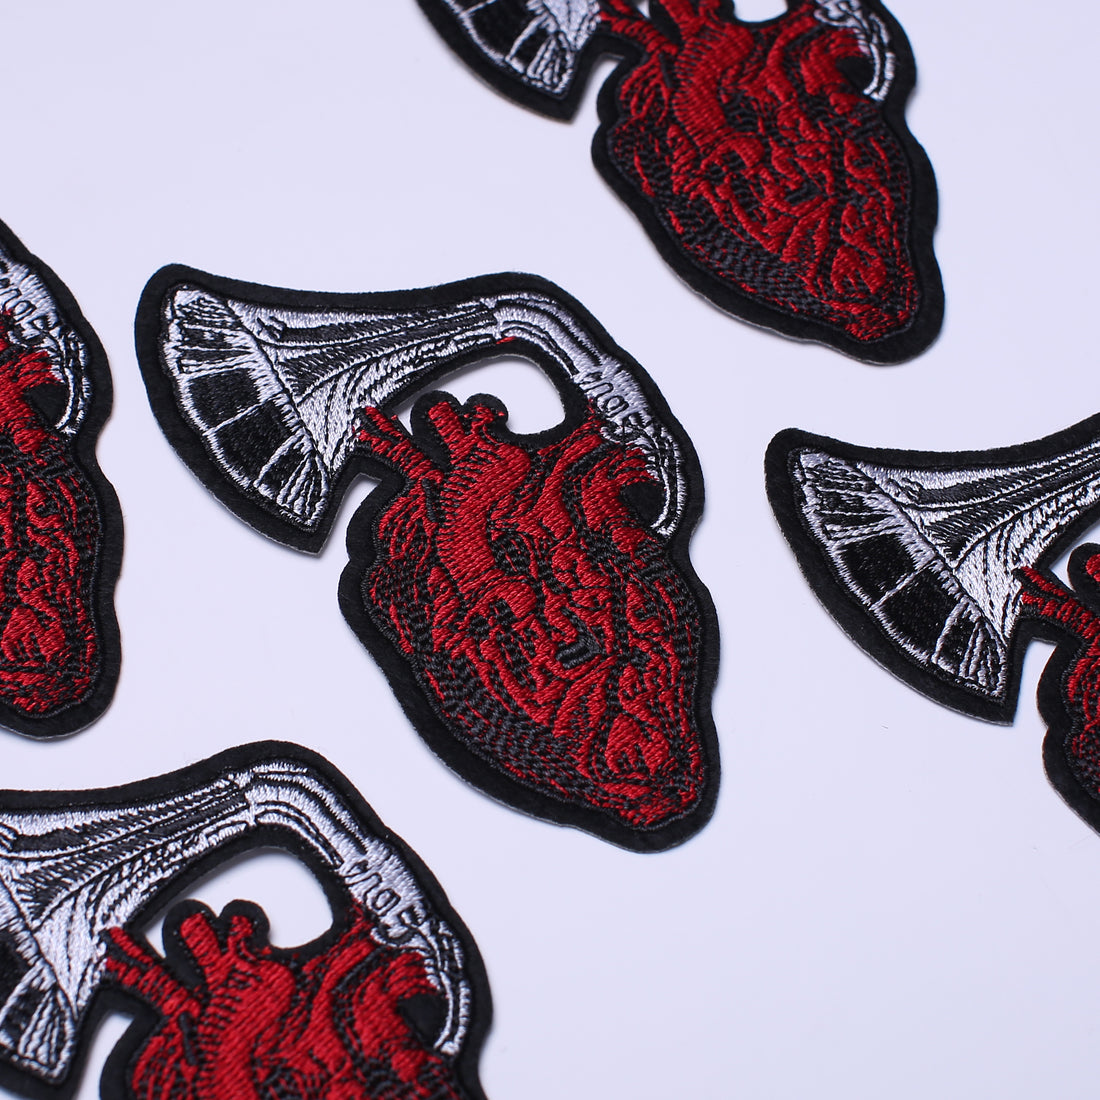 5Pcs Let My Heart Be Heard Embroidered Iron on Patch for Clothes, Iron-on Patches / Sew-on Appliques Patches for Clothing, Jackets, Backpacks, Caps, Jeans